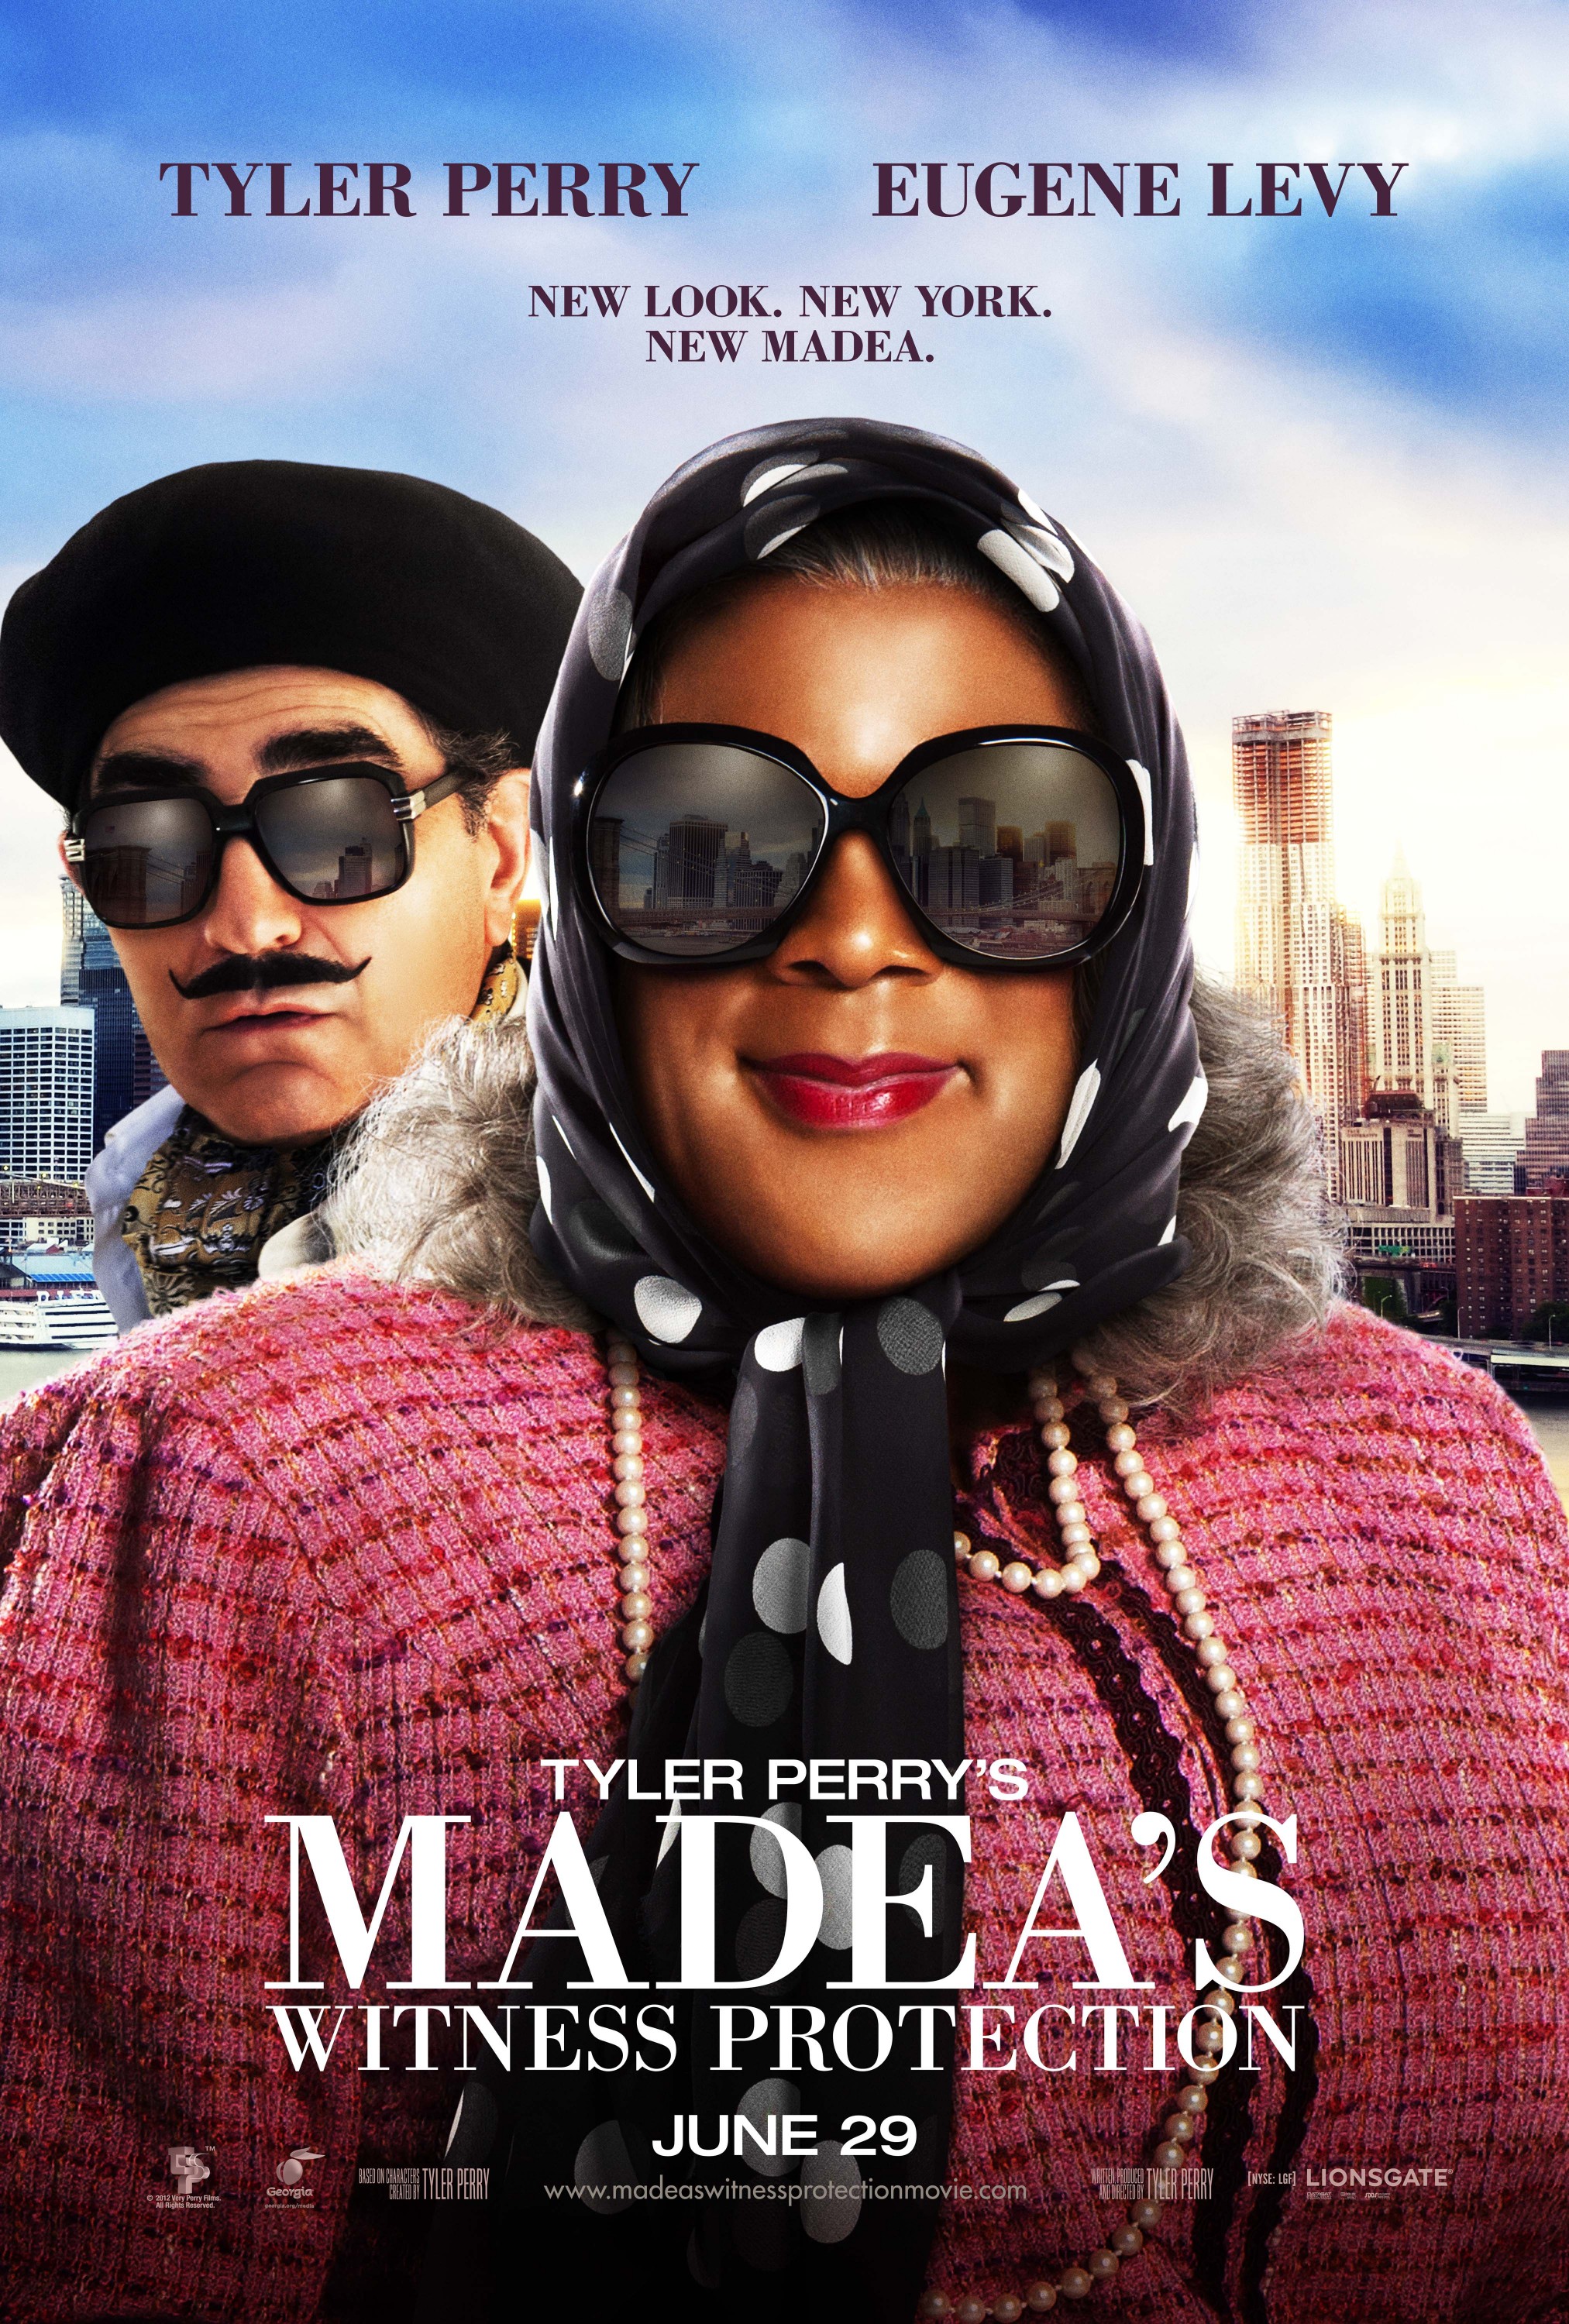 Release Day Round Up: TYLER PERRY’S MADEA’S WITNESS PROTECTION - Tyler Perry Madea Witness Protection Full Movie